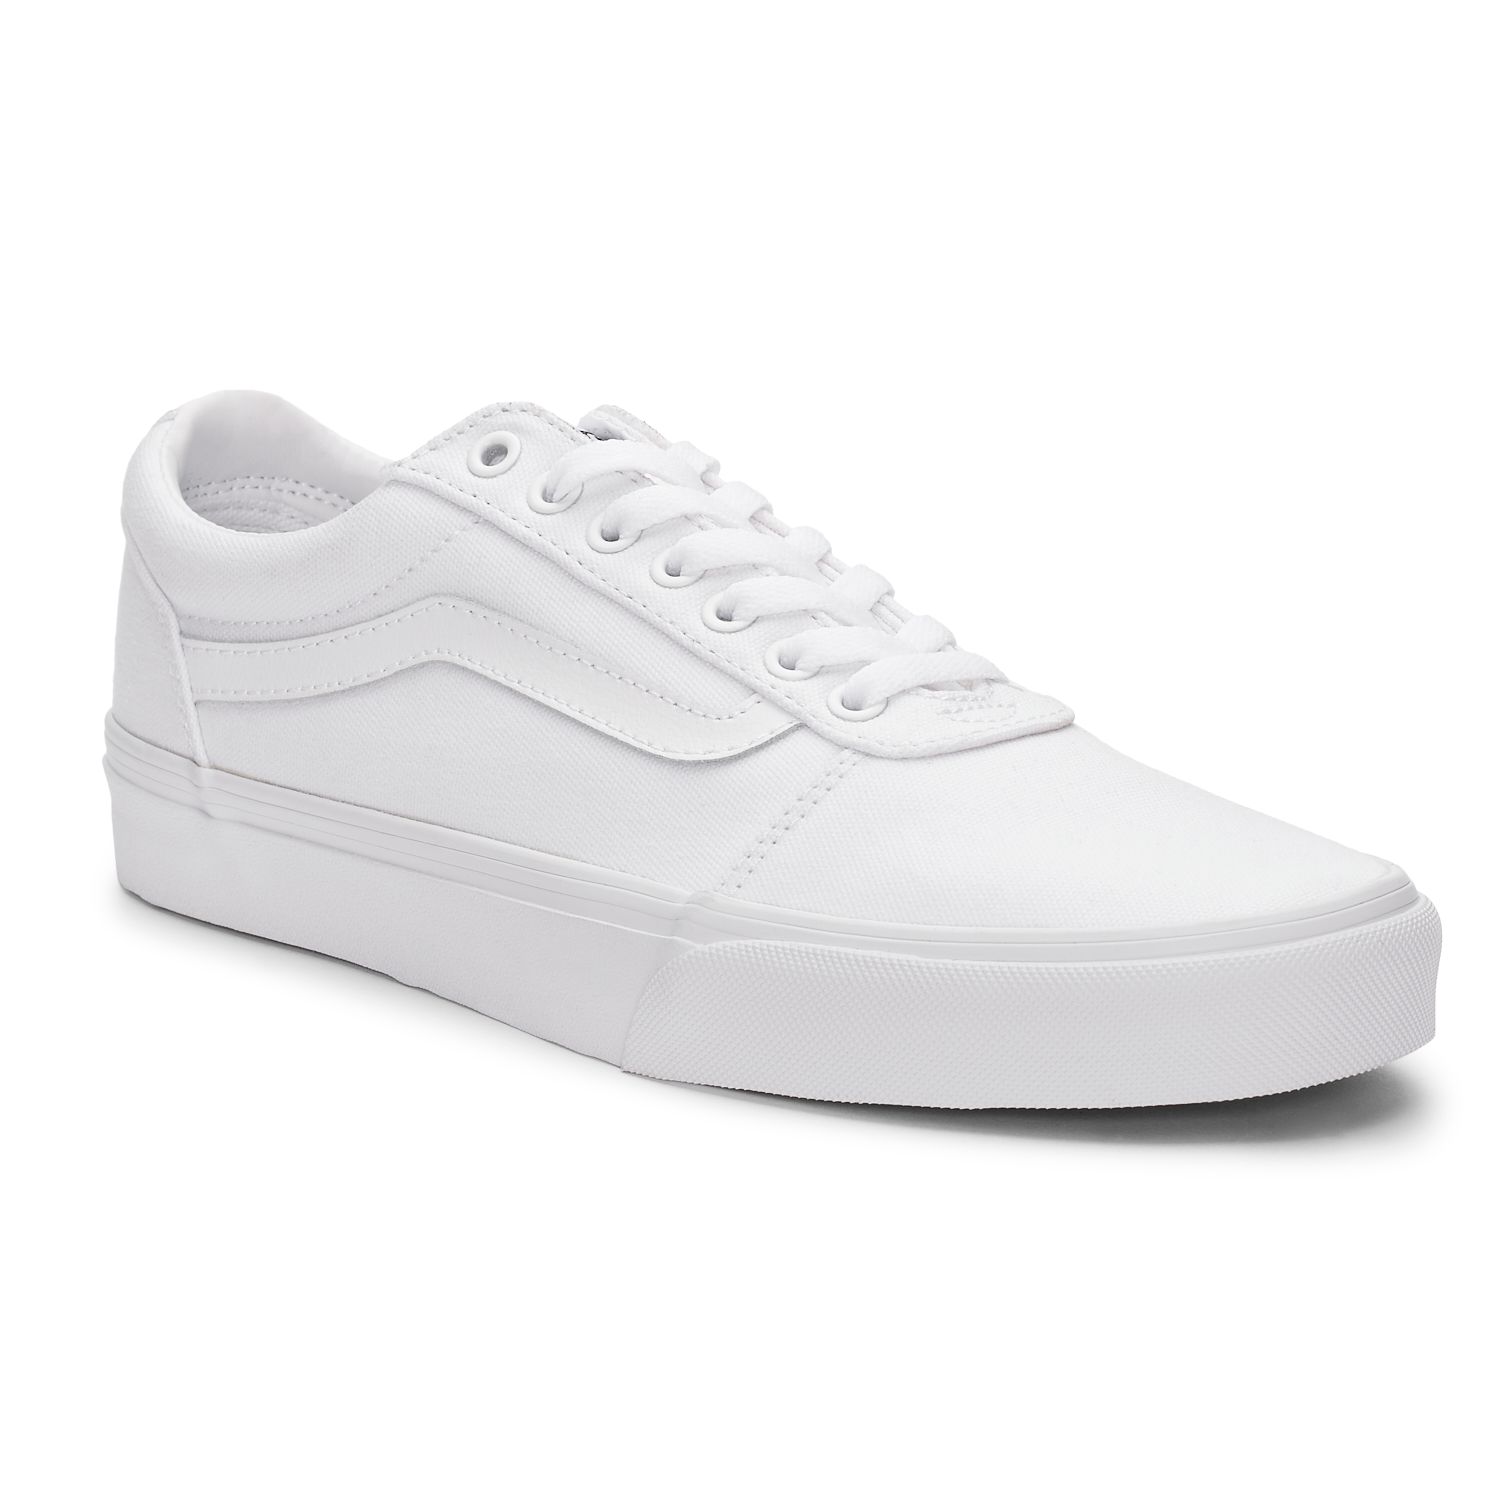 all white van shoes